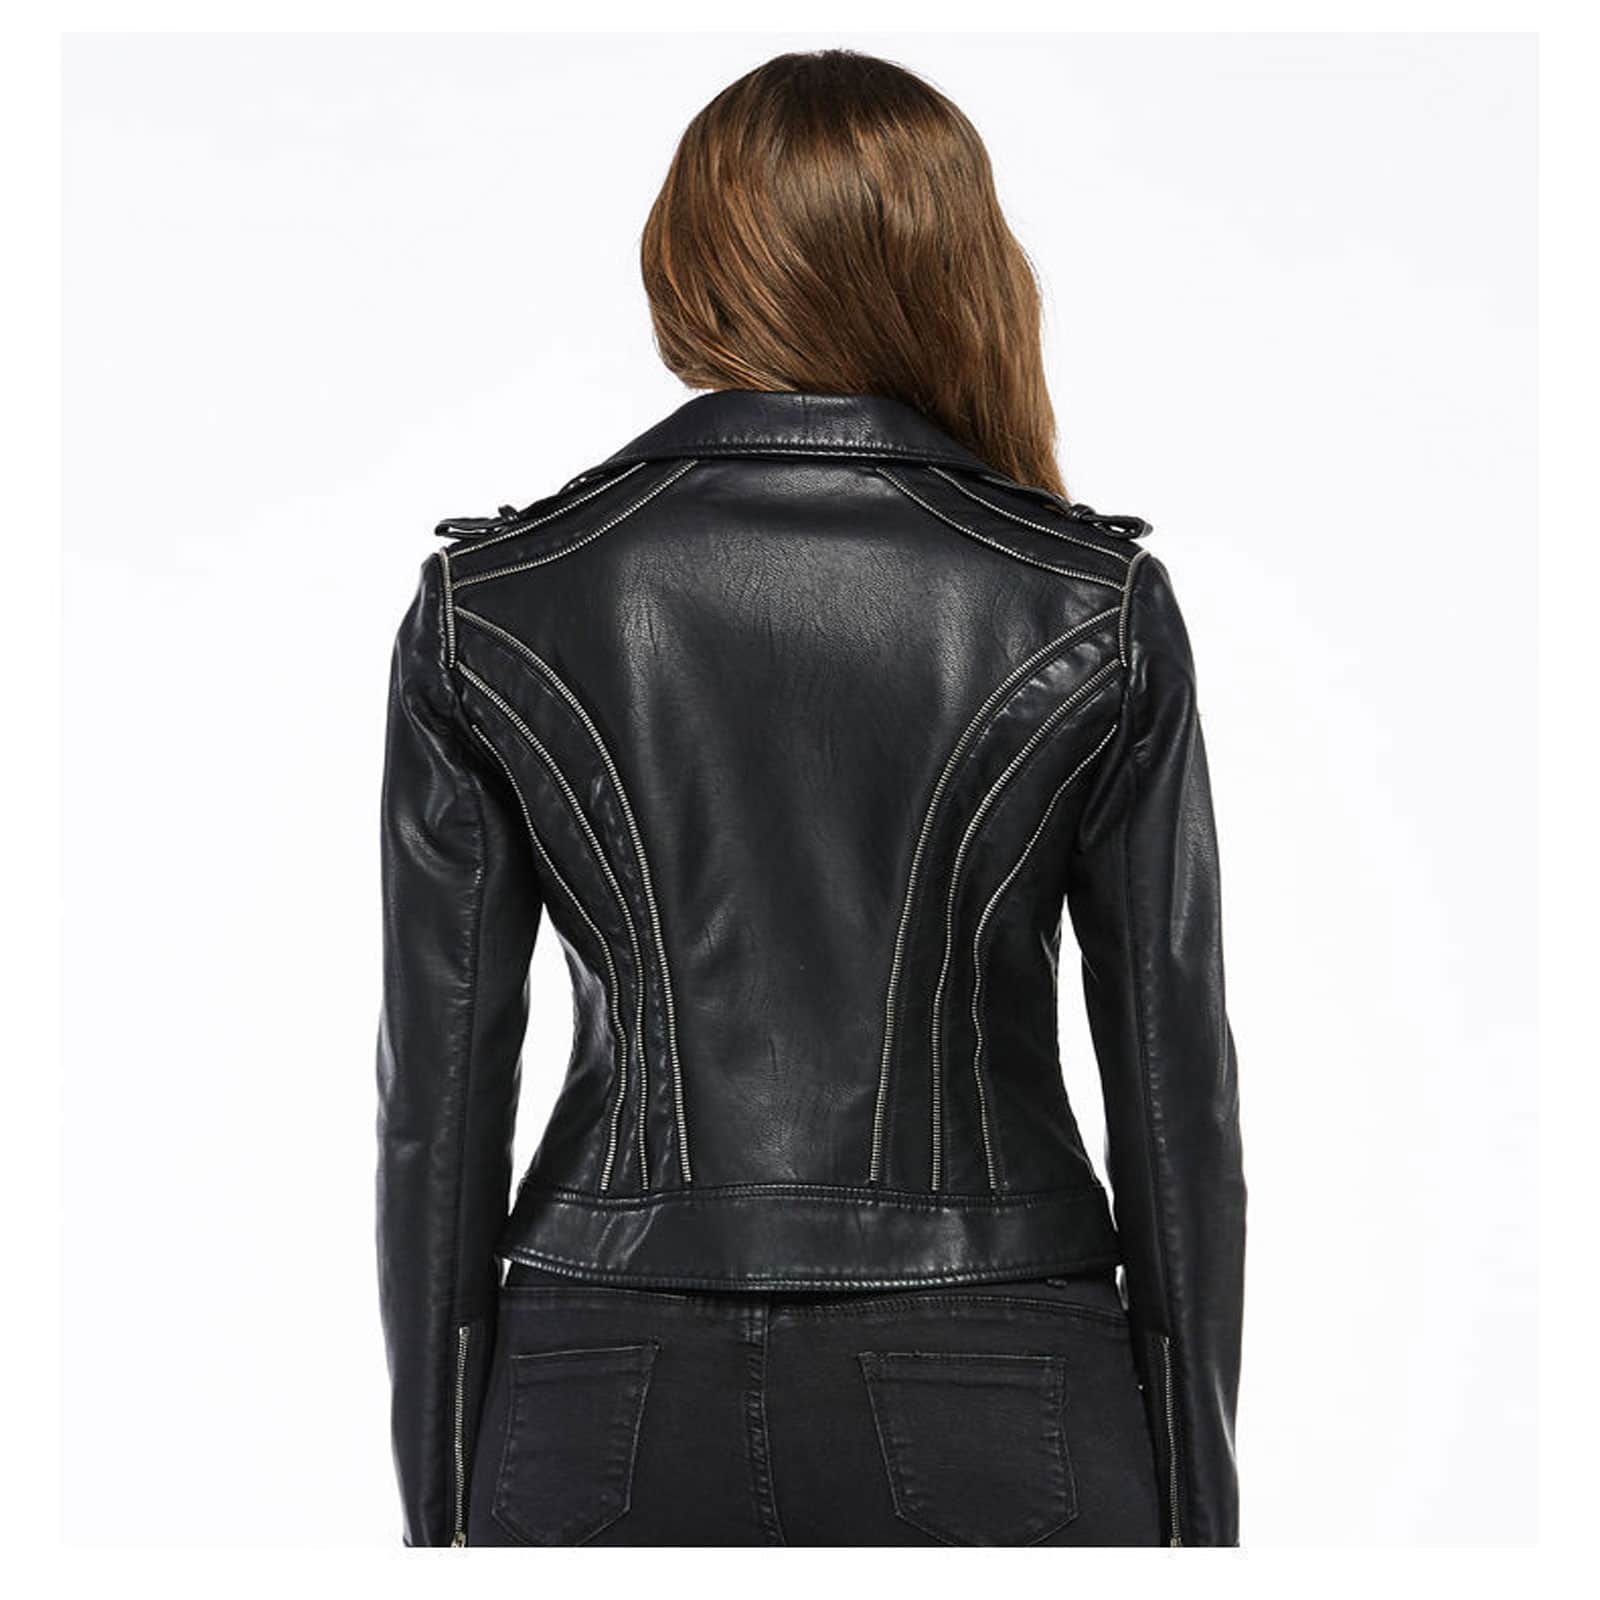 Black leather jacket with zippers